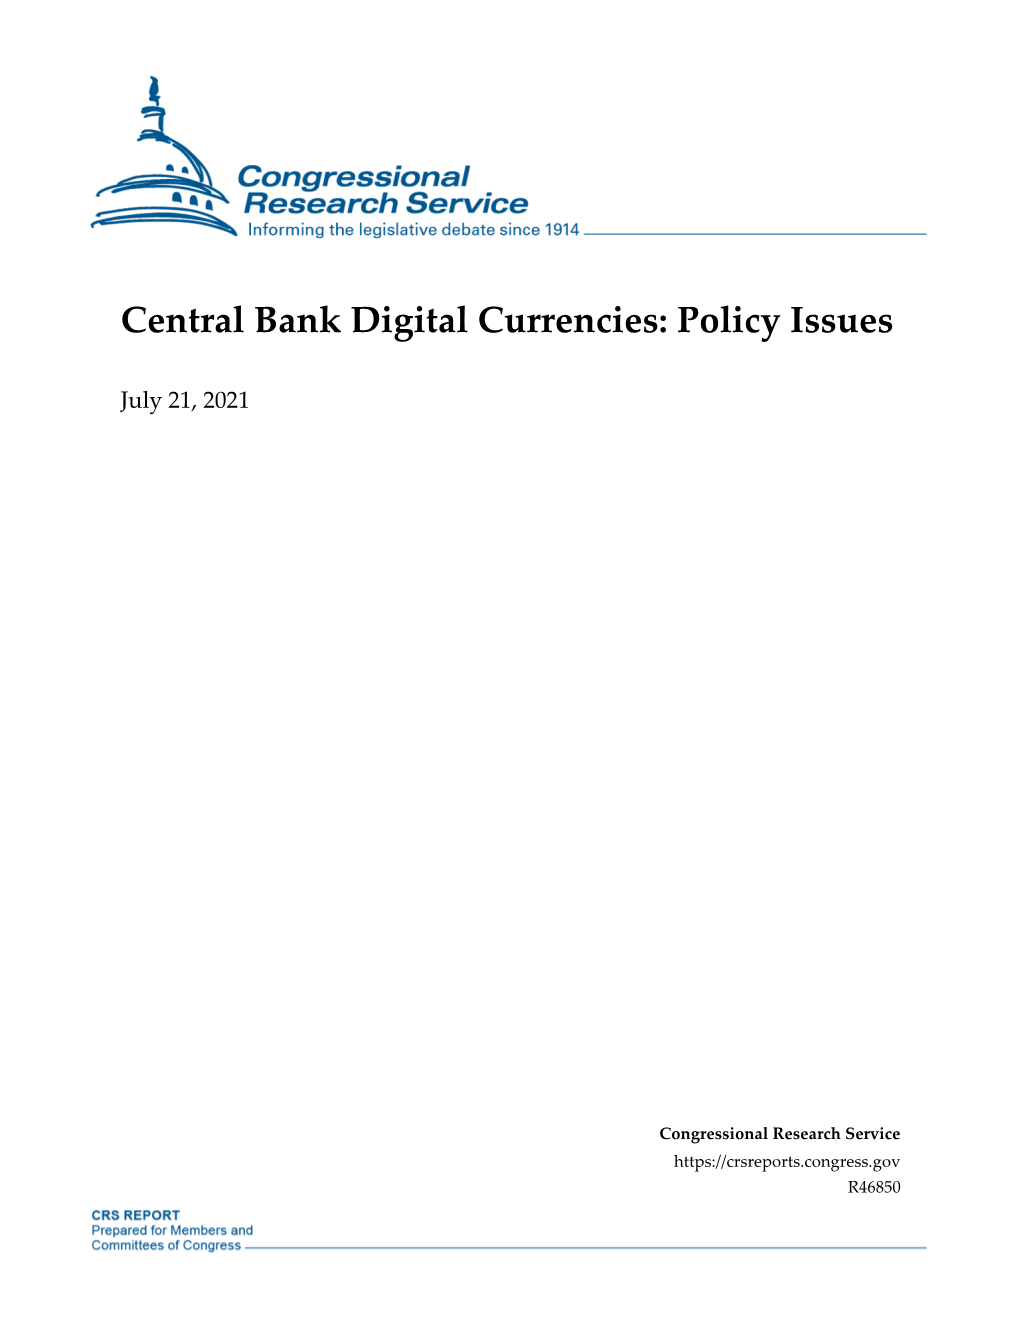 Central Bank Digital Currencies: Policy Issues